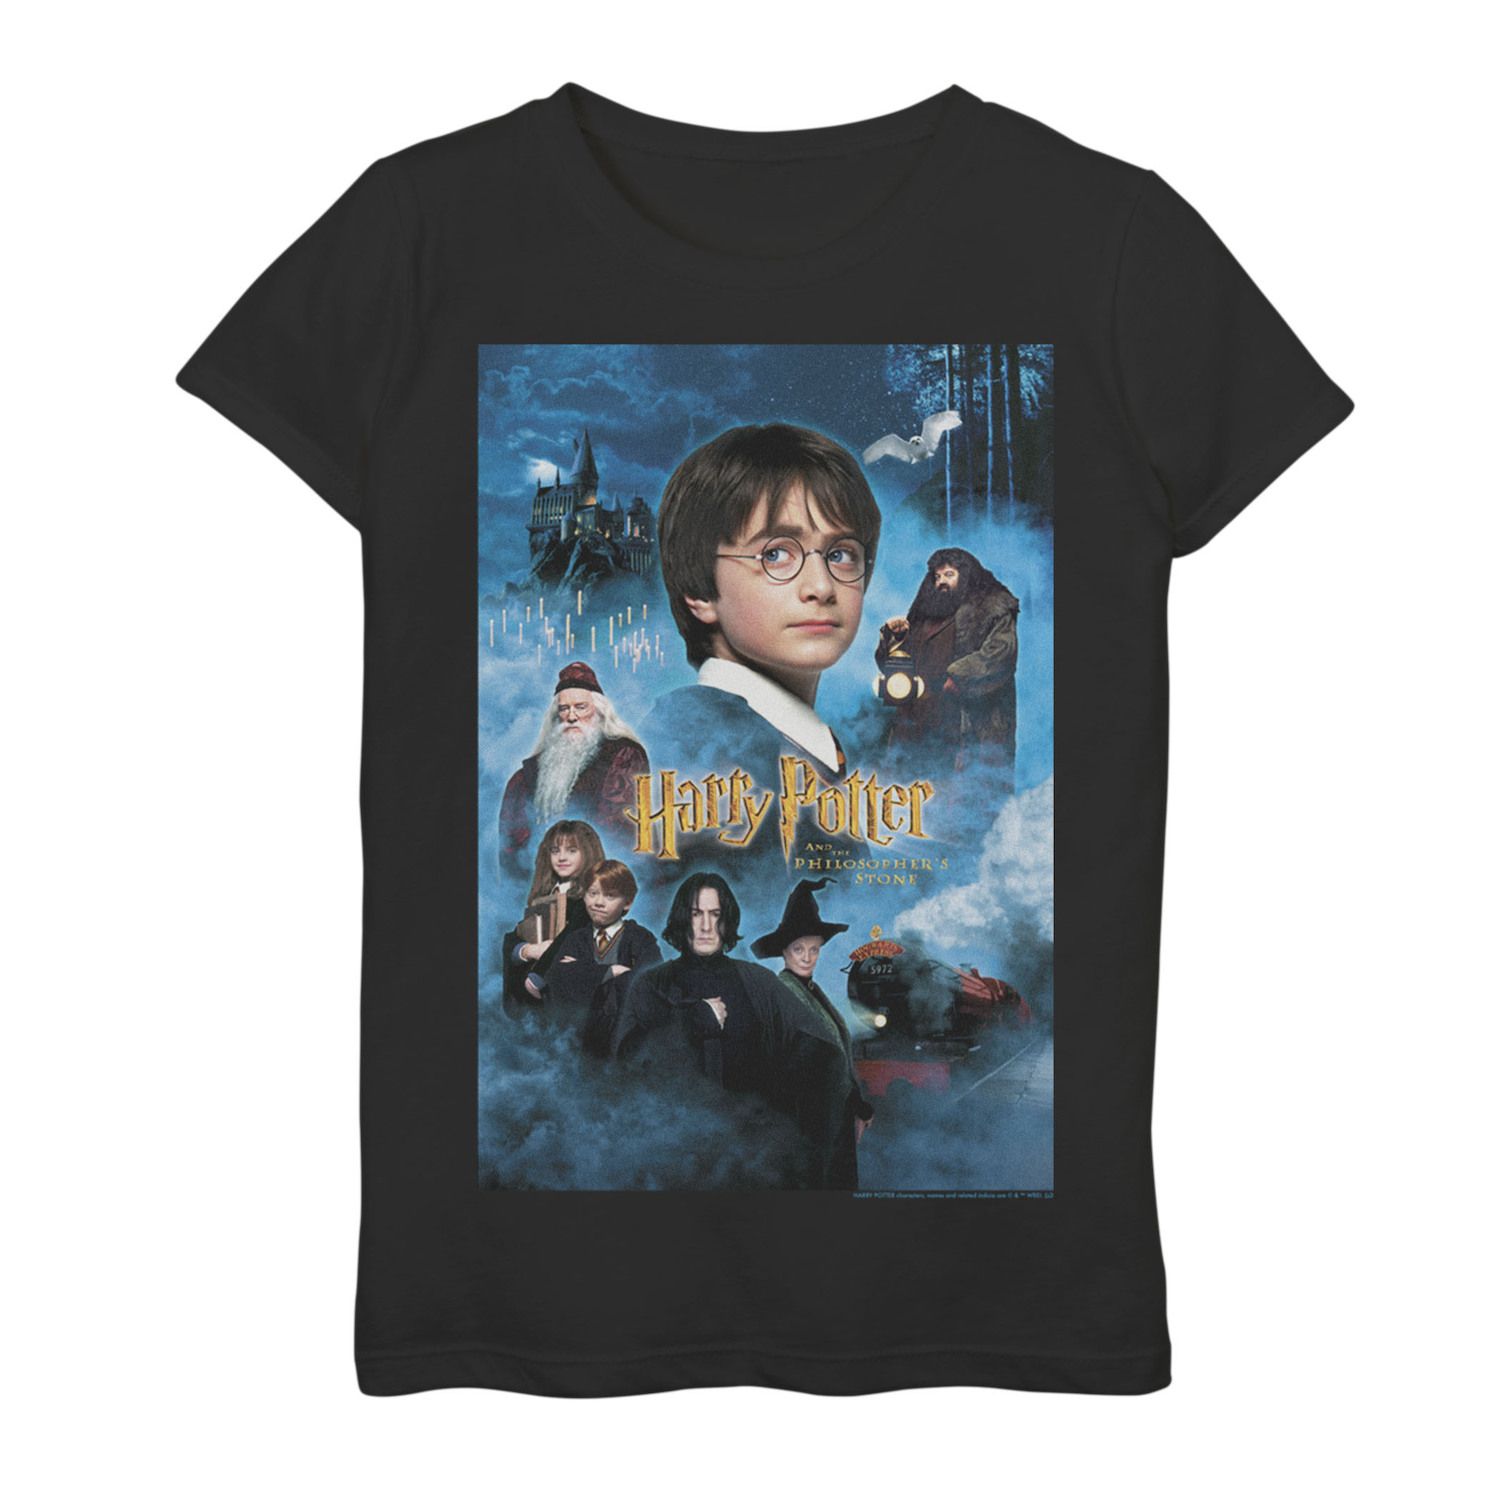 Image for Harry Potter Girls 7-16 And The Philosopher's Stone Poster Graphic Tee at Kohl's.